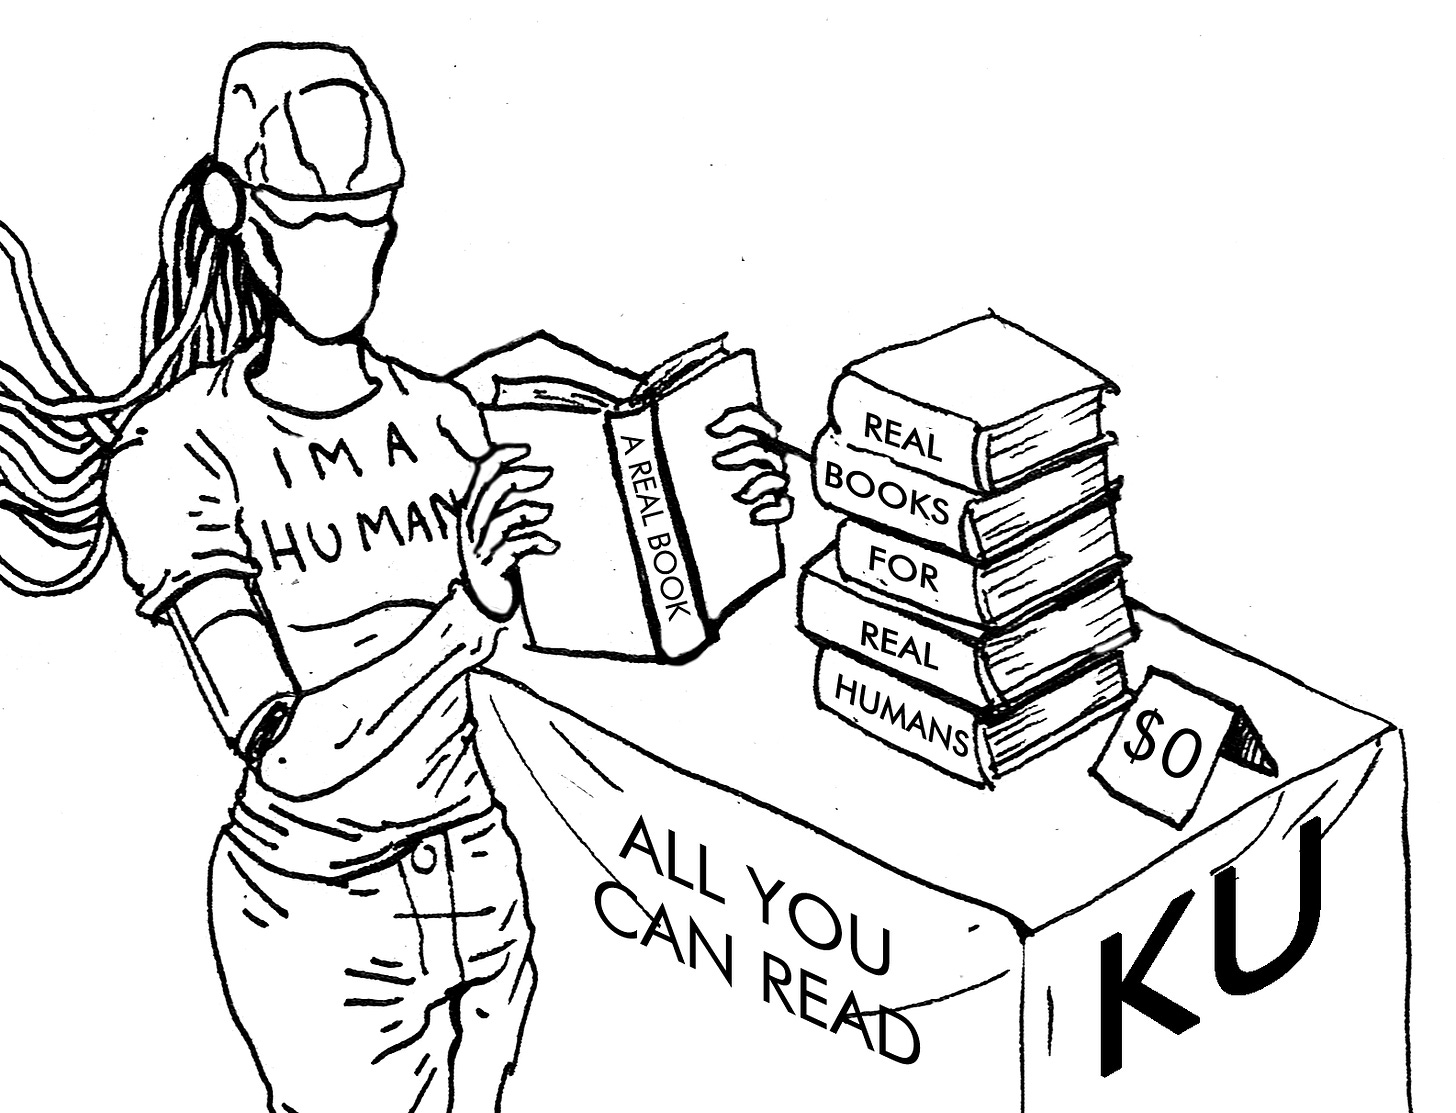 Robot in a shirt saying "I'm a Human" reading a book called A REAL BOOK, fro a table of $0, all-you-can-read Kindle Unlimited books.